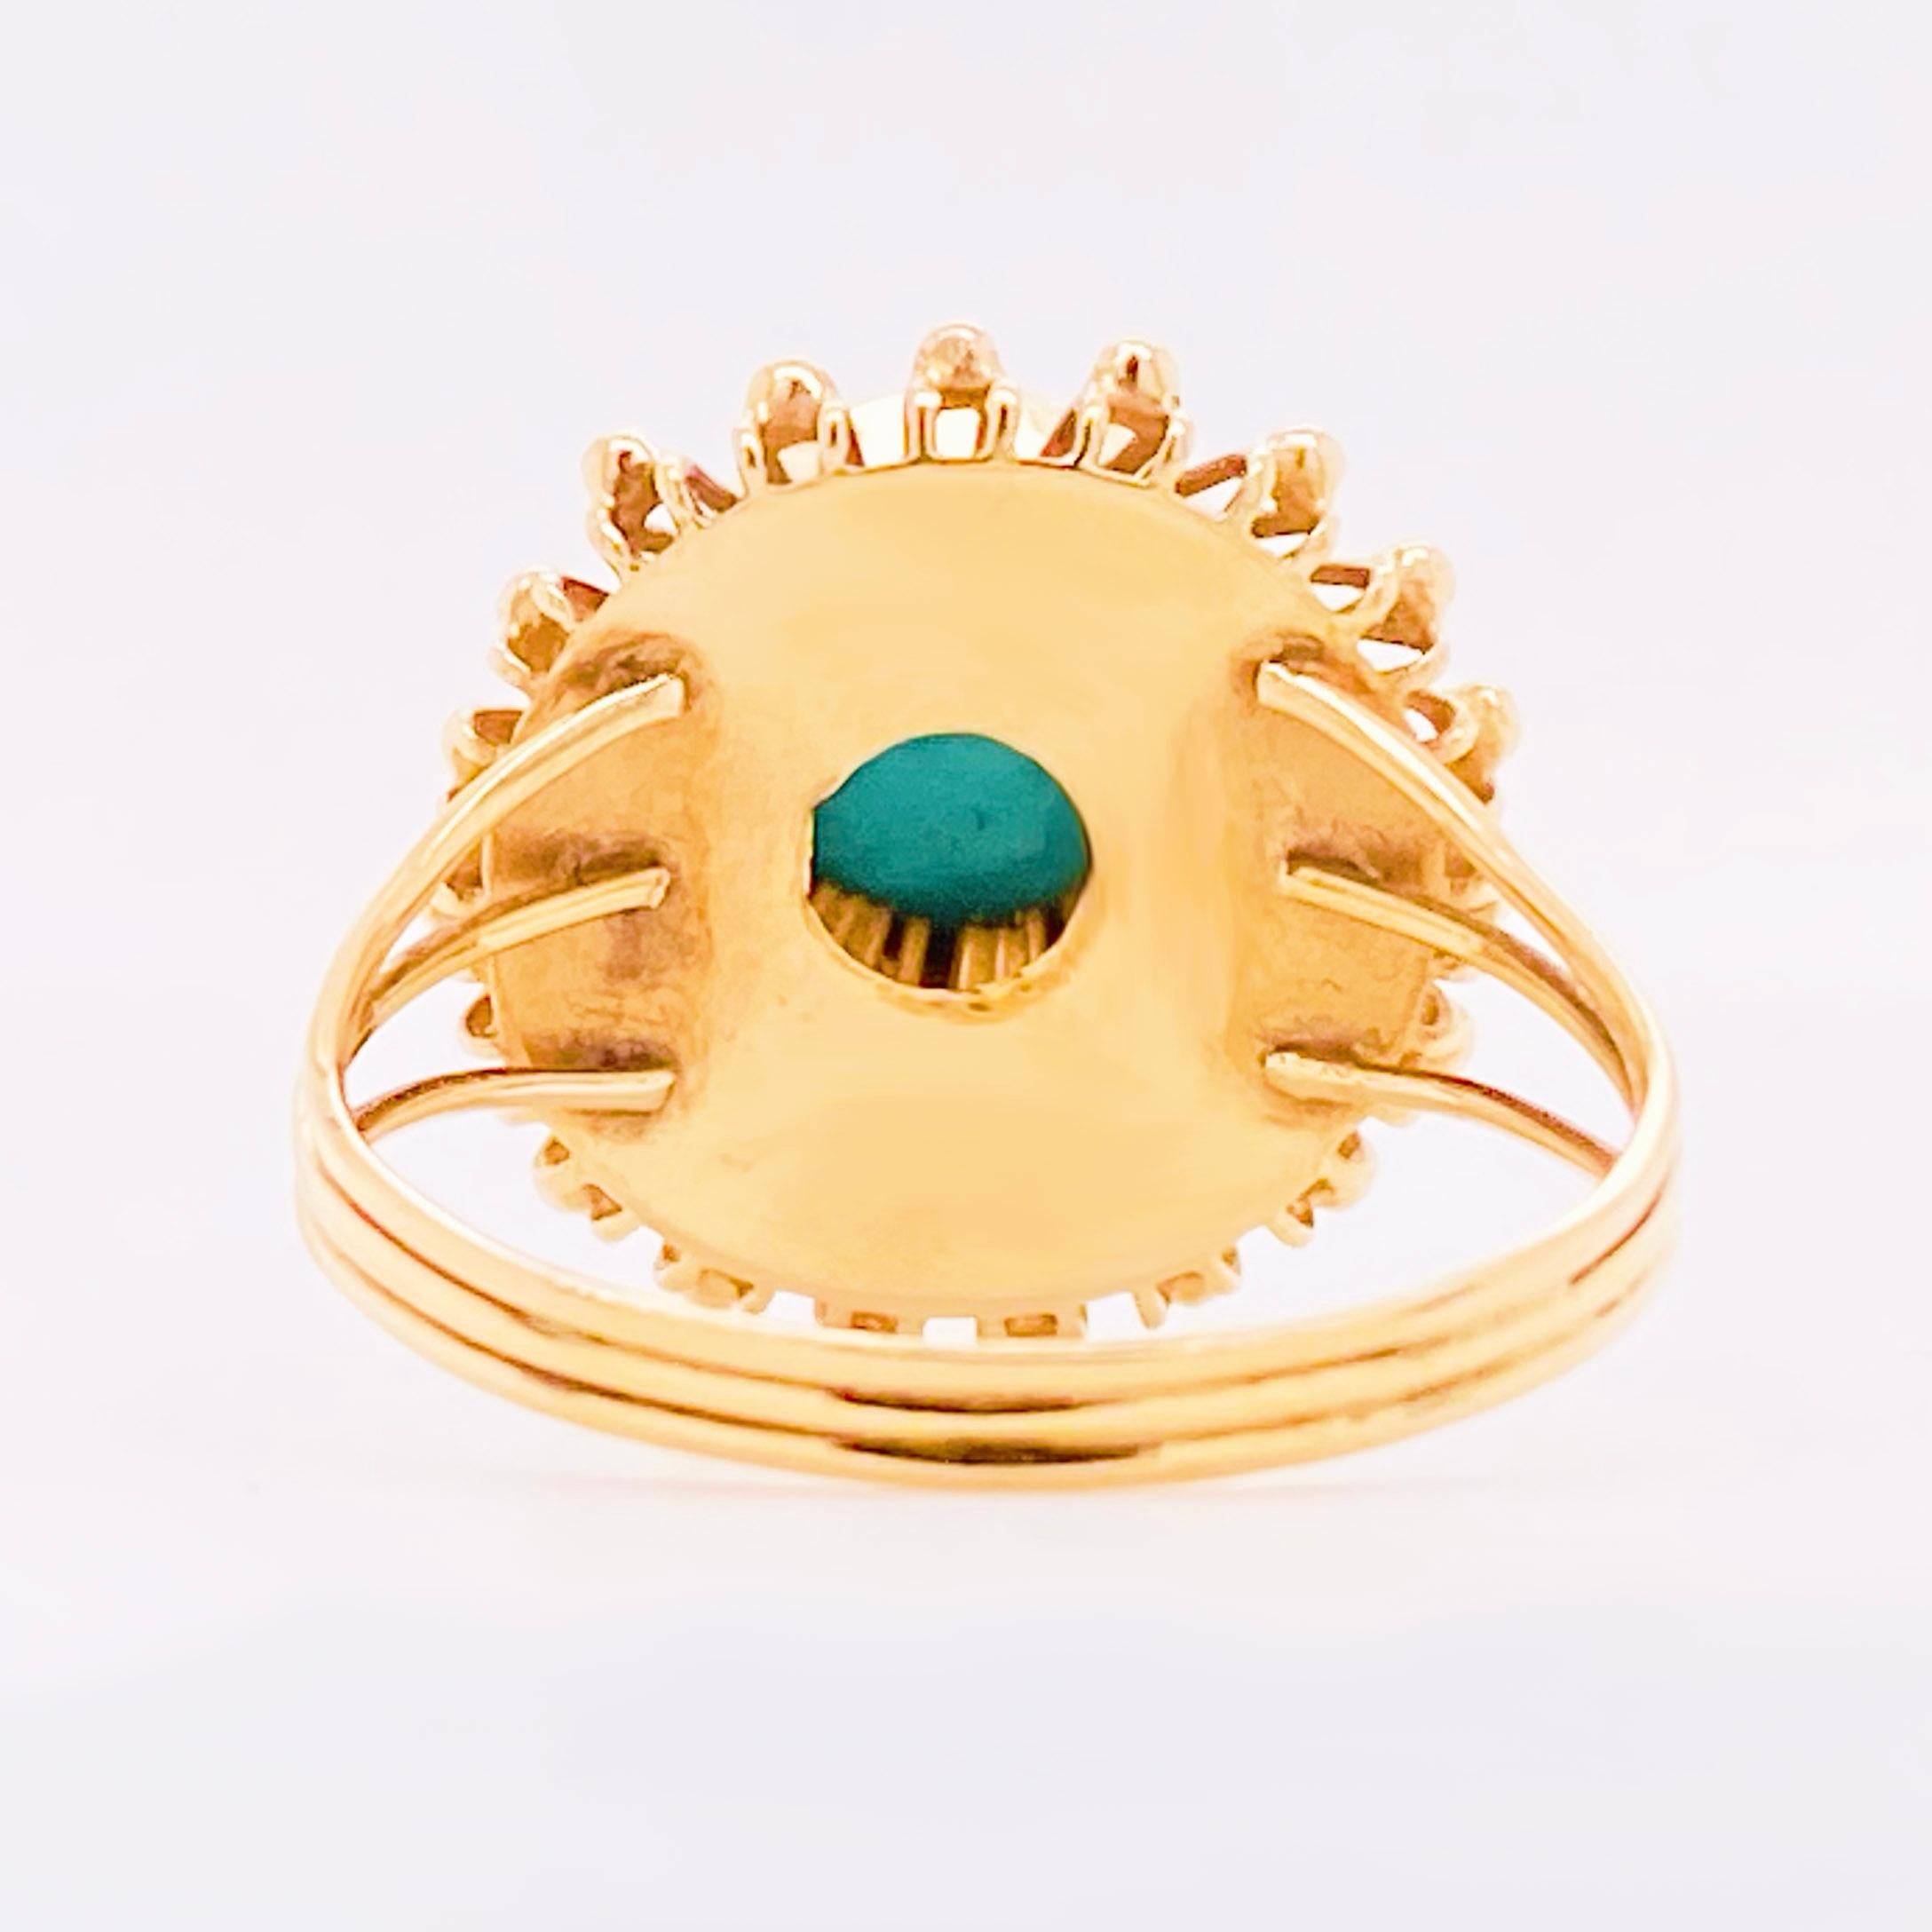 Cabochon Turquoise Bombe Ring, 1950 14 Karat Gold, Green, Blue Turquoise Statement Ring For Sale